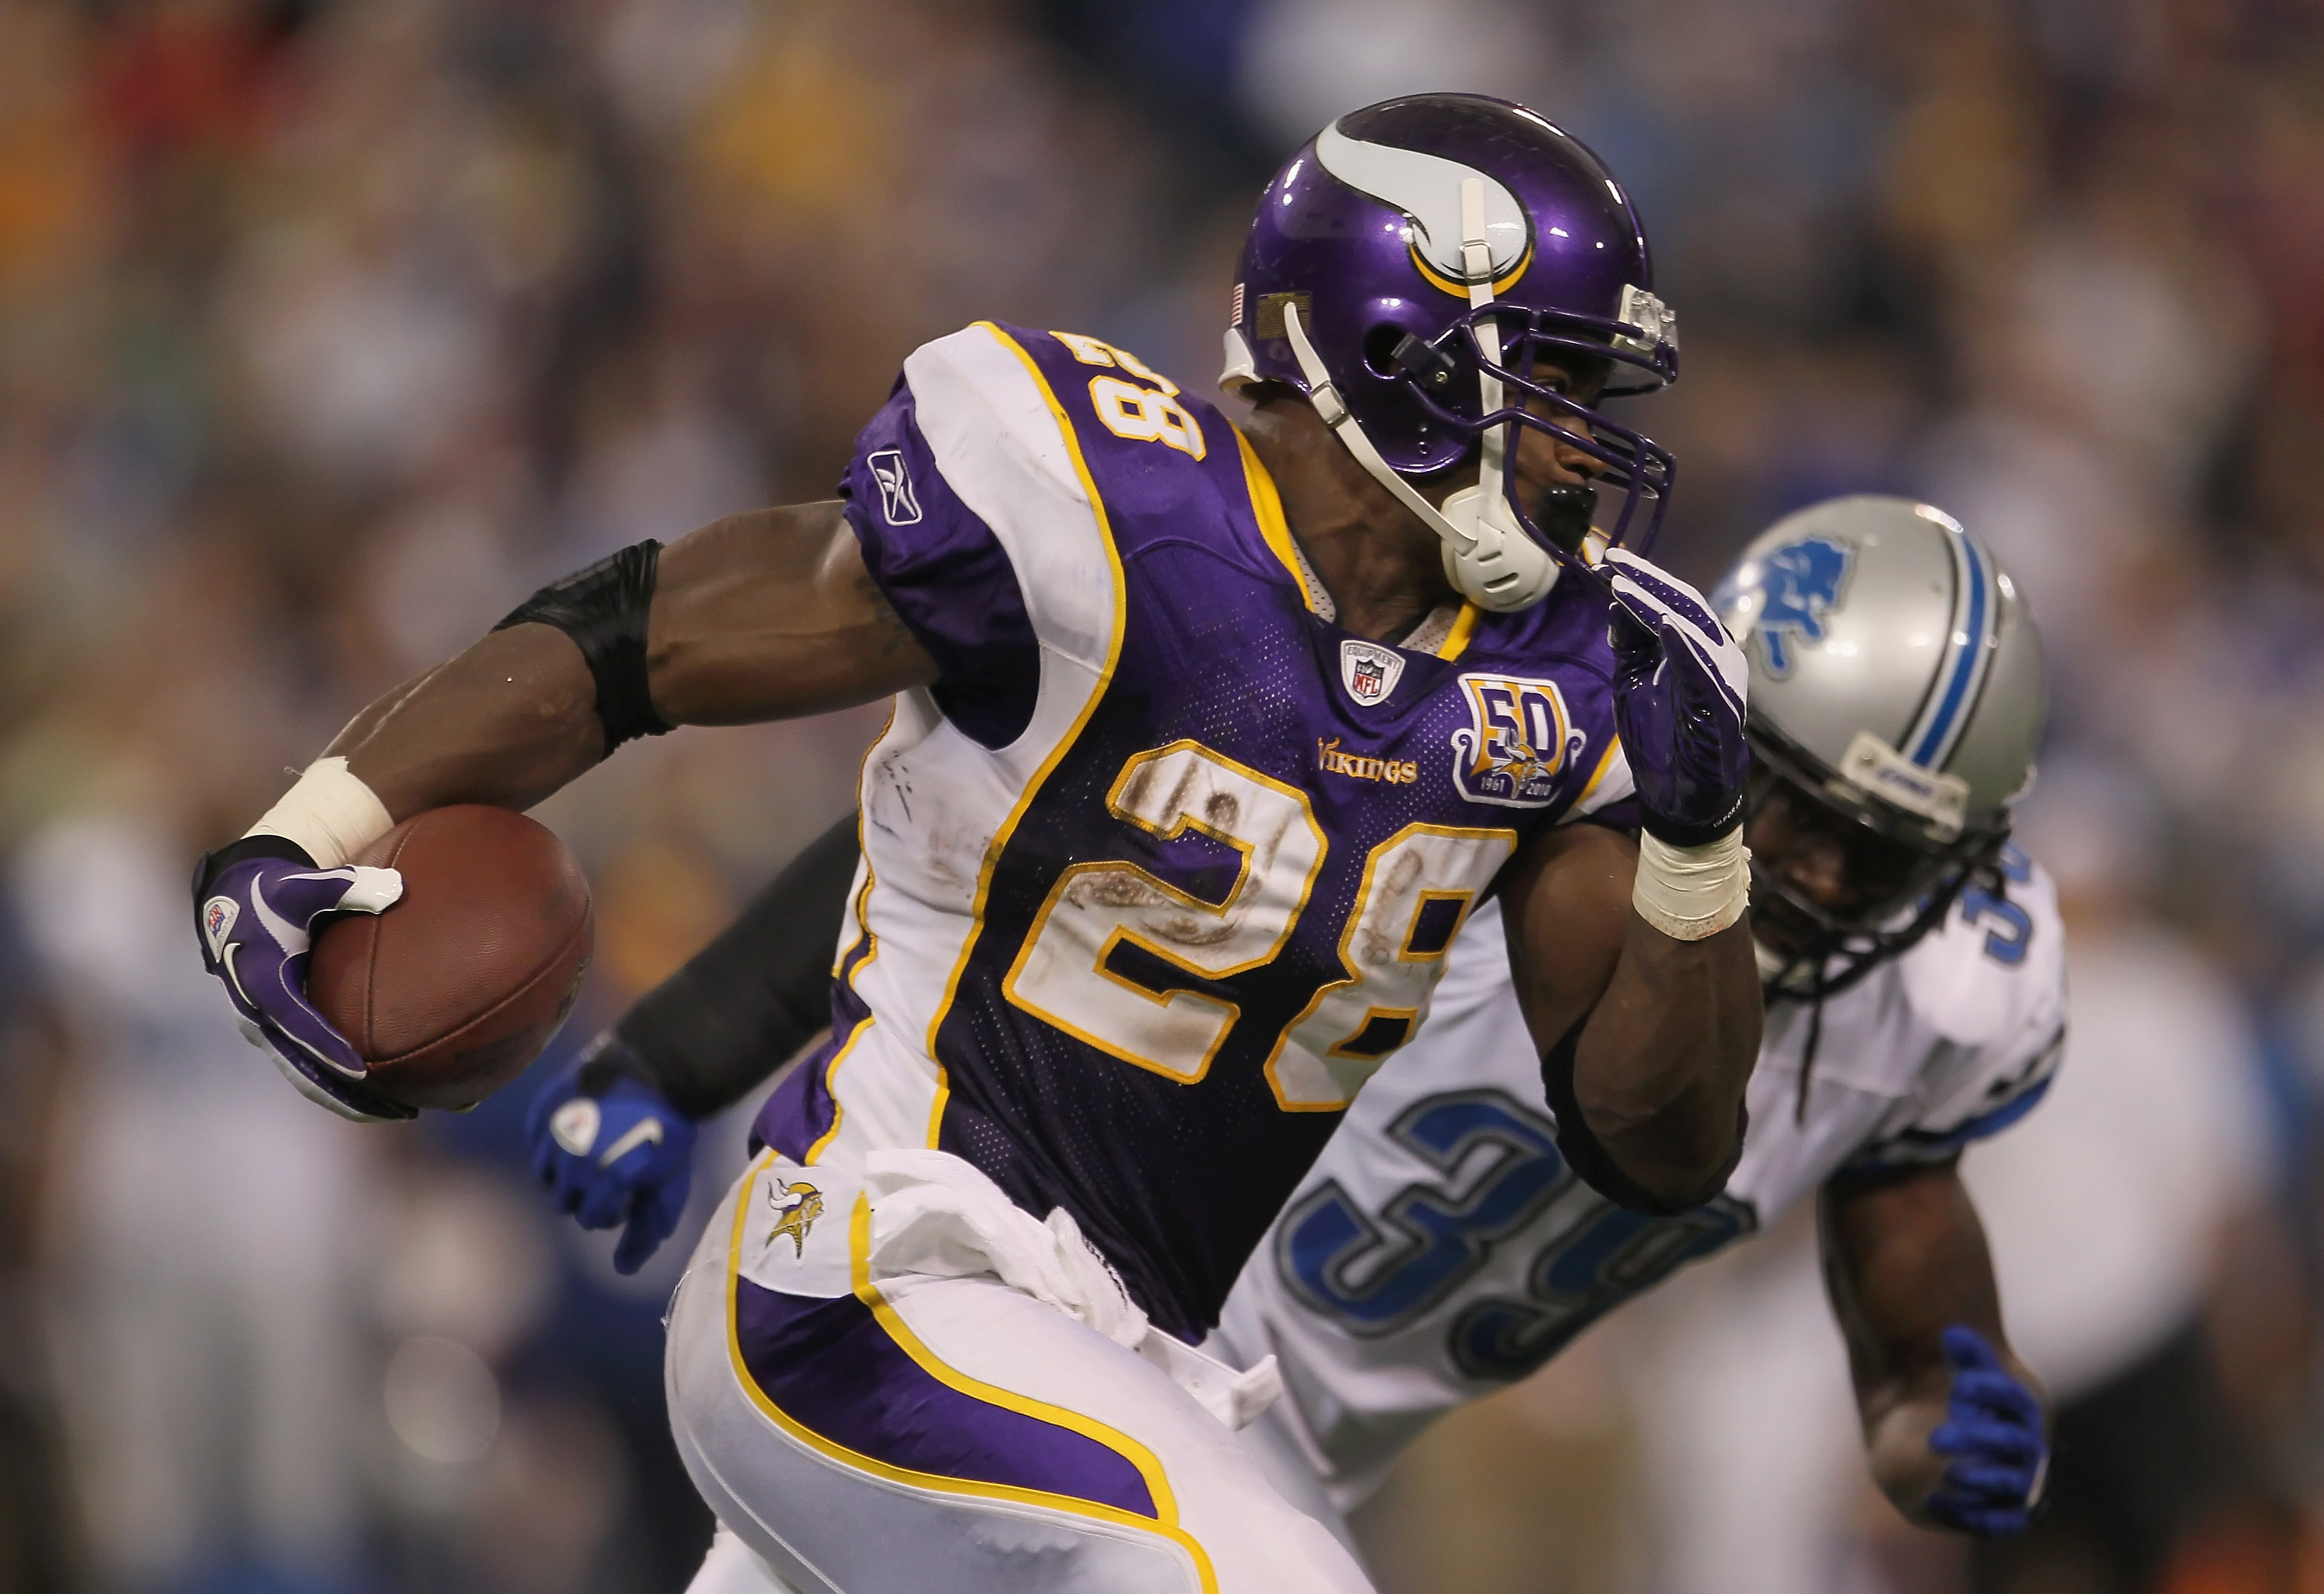 MINNEAPOLIS - SEPTEMBER 26:  Running back Adrian Peterson #28 of the Minnesota Vikings carries the ball around C.C. Brown #39 of the Detroit Lions for a touchdown during the second half at Hubert H. Humphrey Metrodome on September 26, 2010 in Minneapolis,